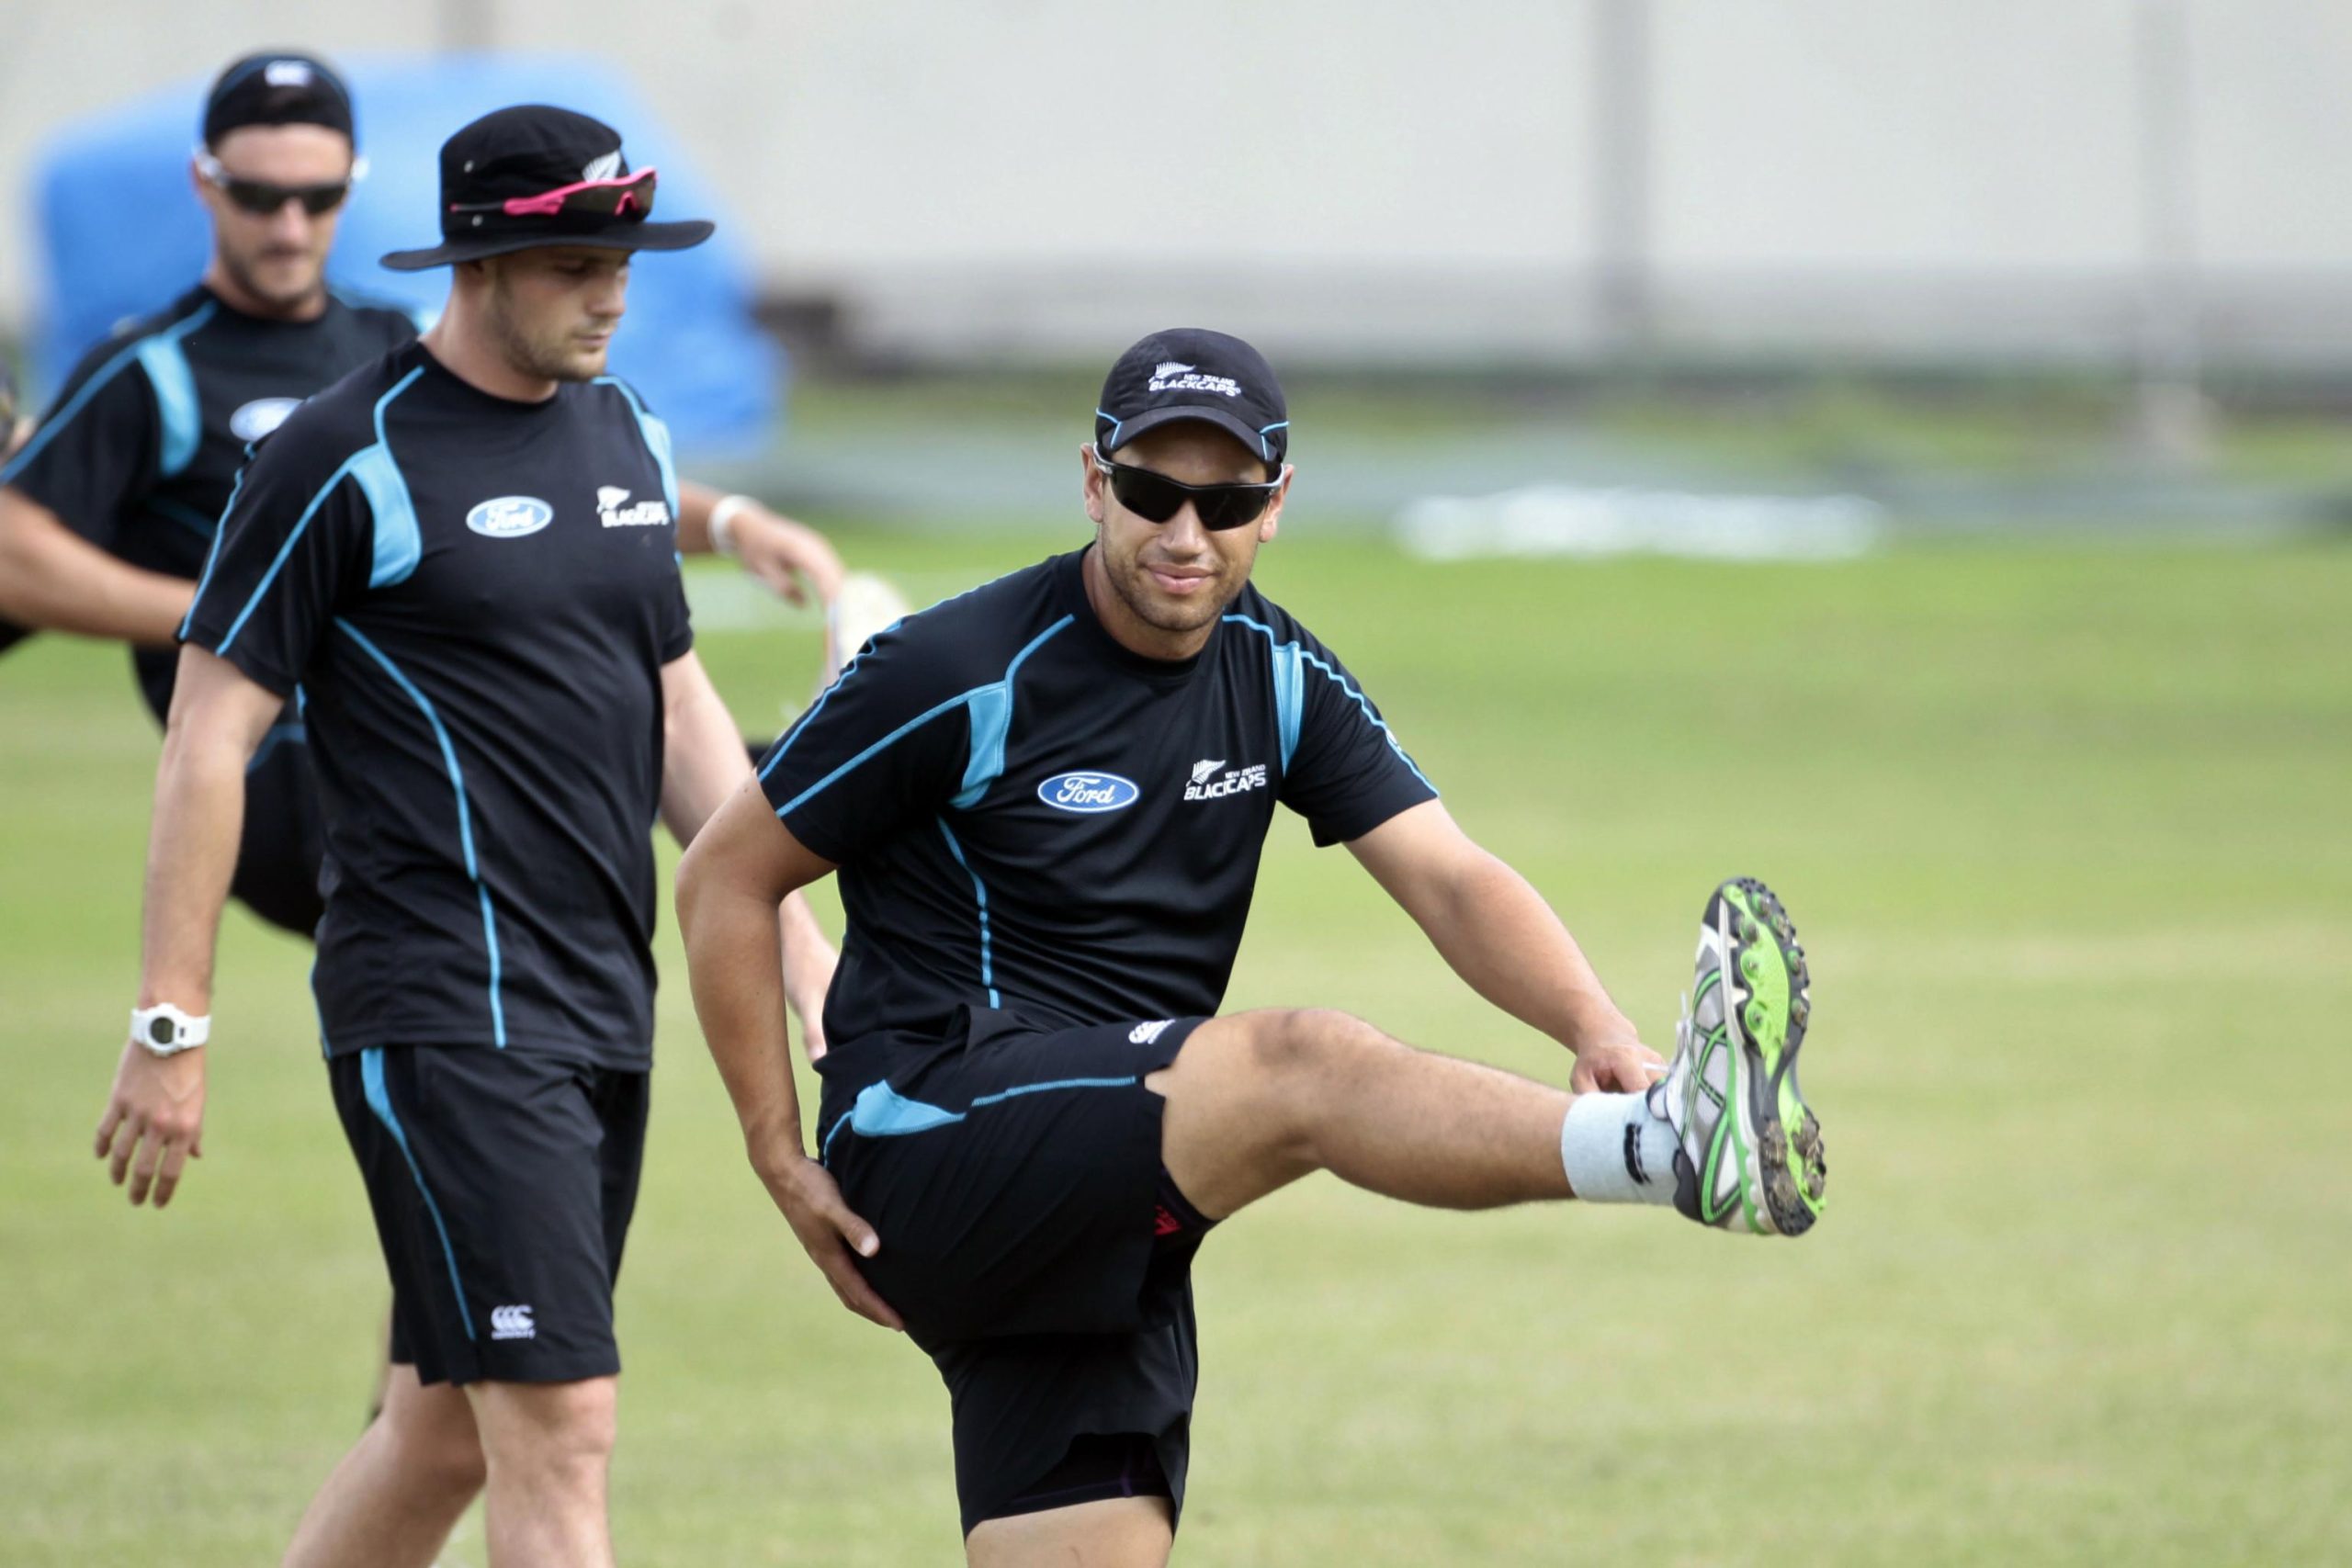 Nine members of the New Zealand team had recently played in Pakistan as well; they were members of the Test or ODI squads... (Read more)